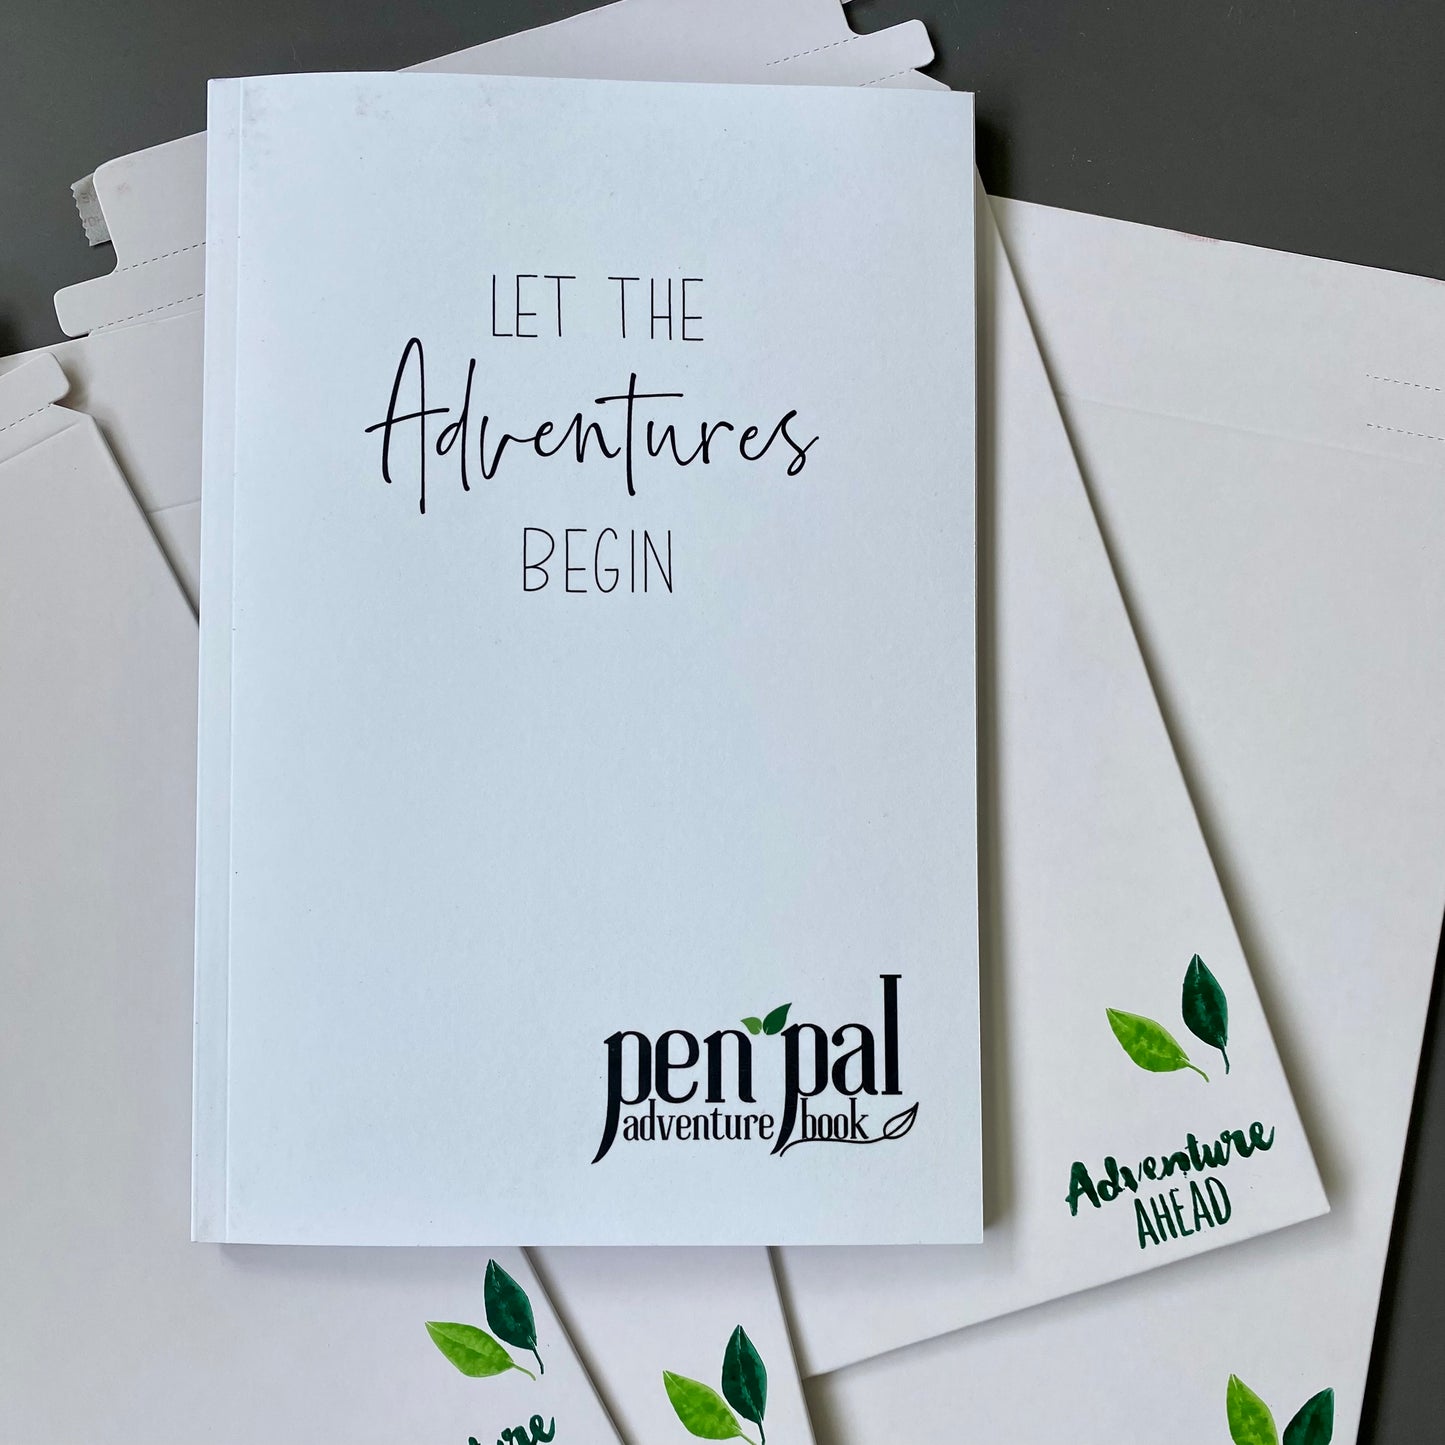 Pen Pal Adventure Book - Play Along and Add Your Story to a Pen Pal Adventure Book!